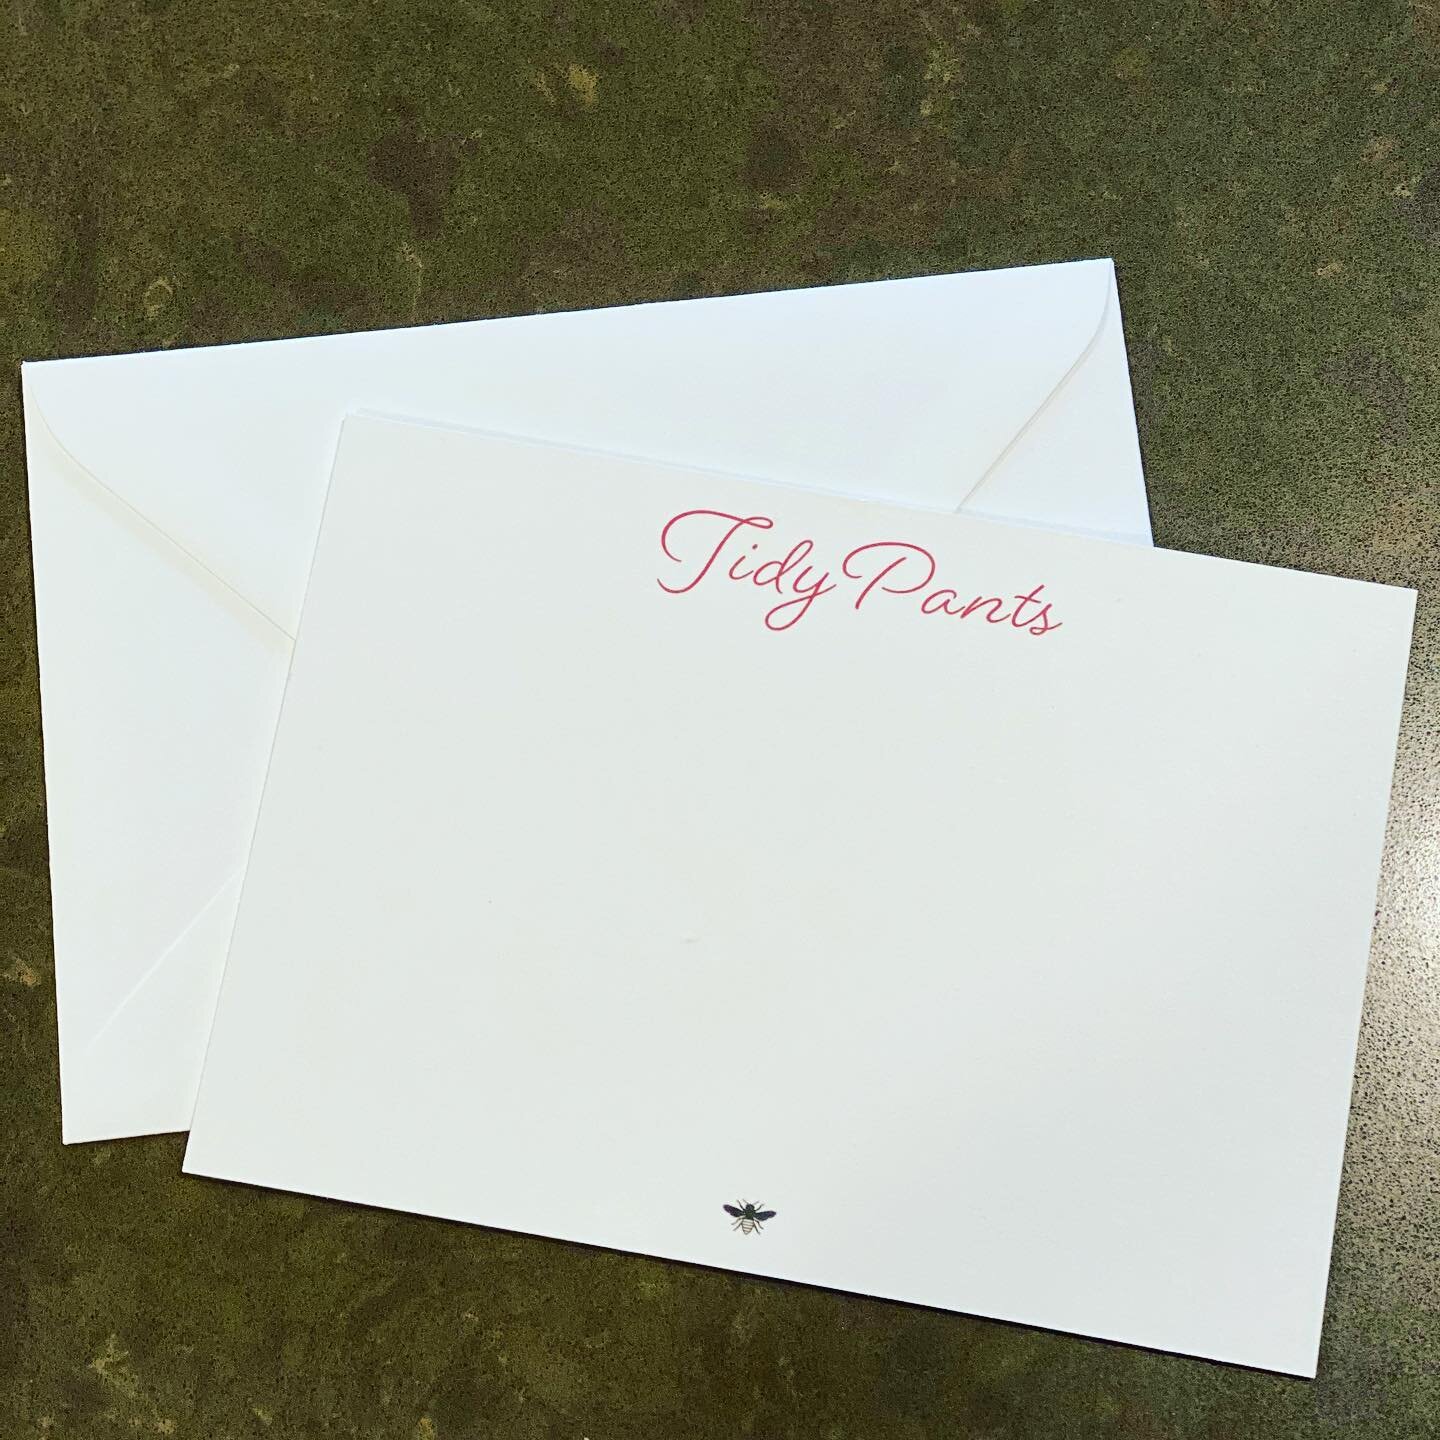 Classic clean stationery with a little flare for a busy bee of a client whose goal is just that; clean fun! @tidy.pants #getorganized #tidyup #cleanhouse